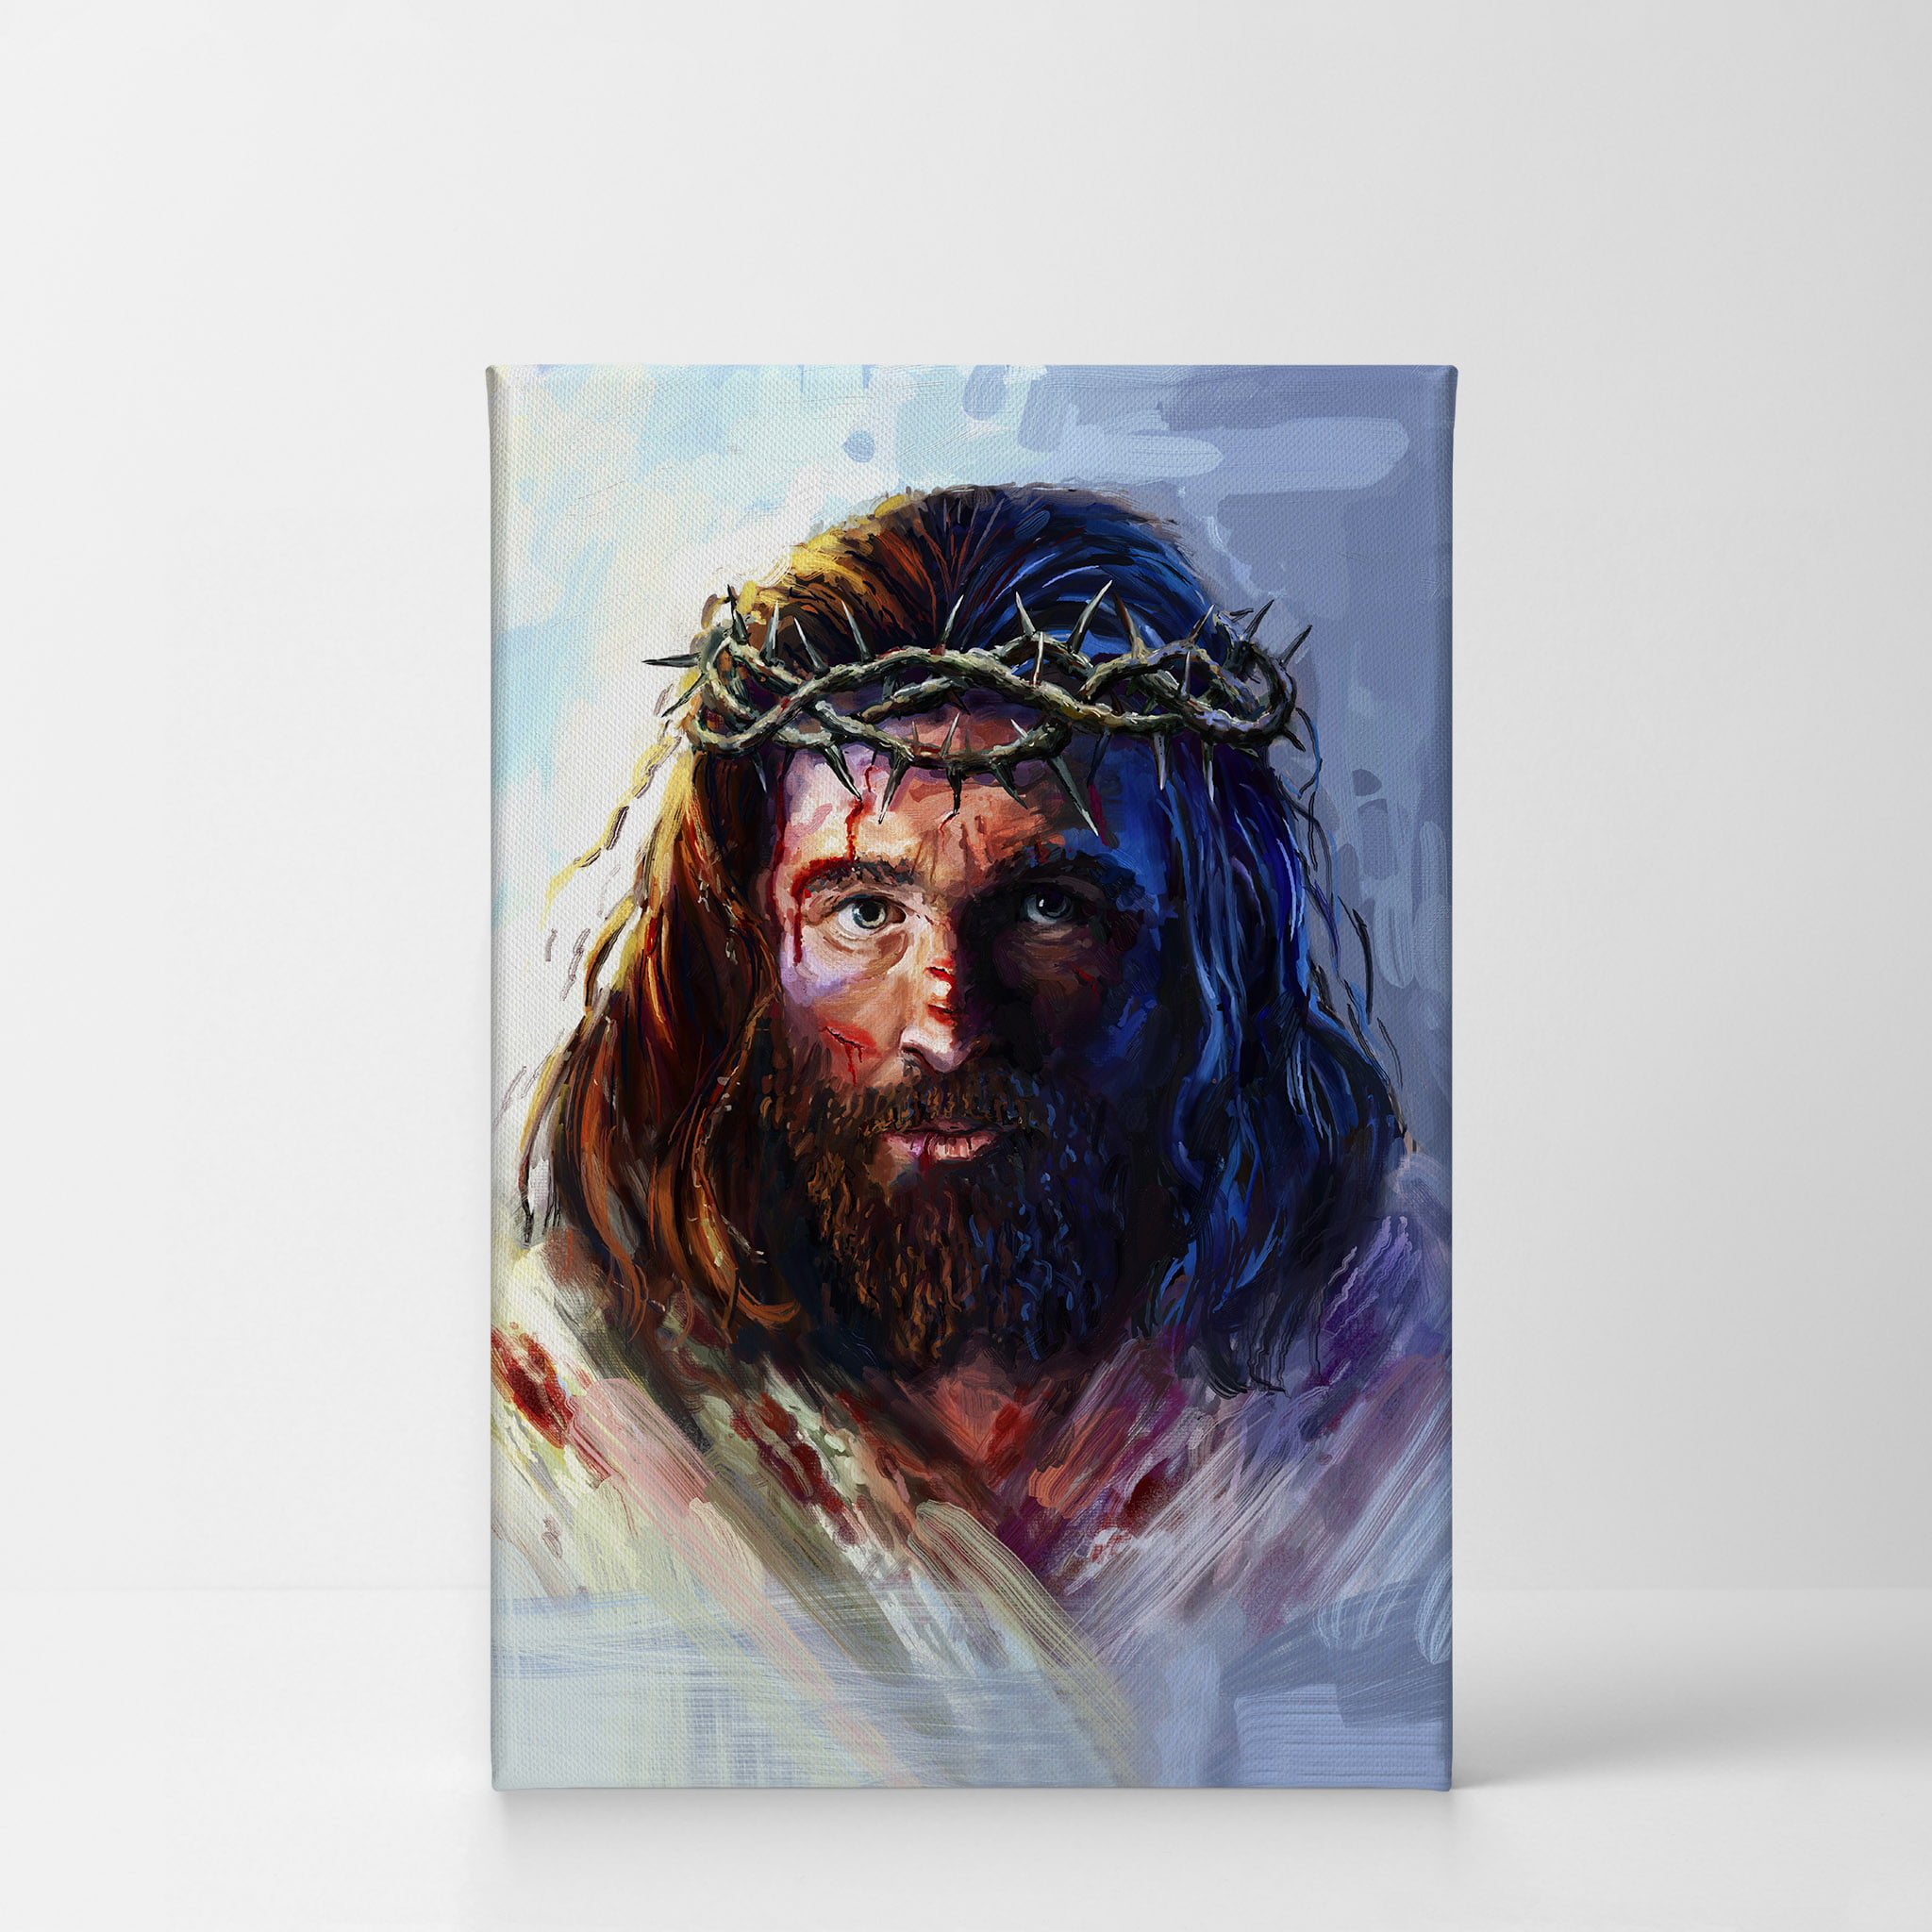 Smile Art Design Jesus Christ in a Crown of Thorns Oil Painting  Reproduction Canvas Wall Art Print Jesus Christ Religious Living Room  Bedroom Office Home Decor Christian Gift 30x40